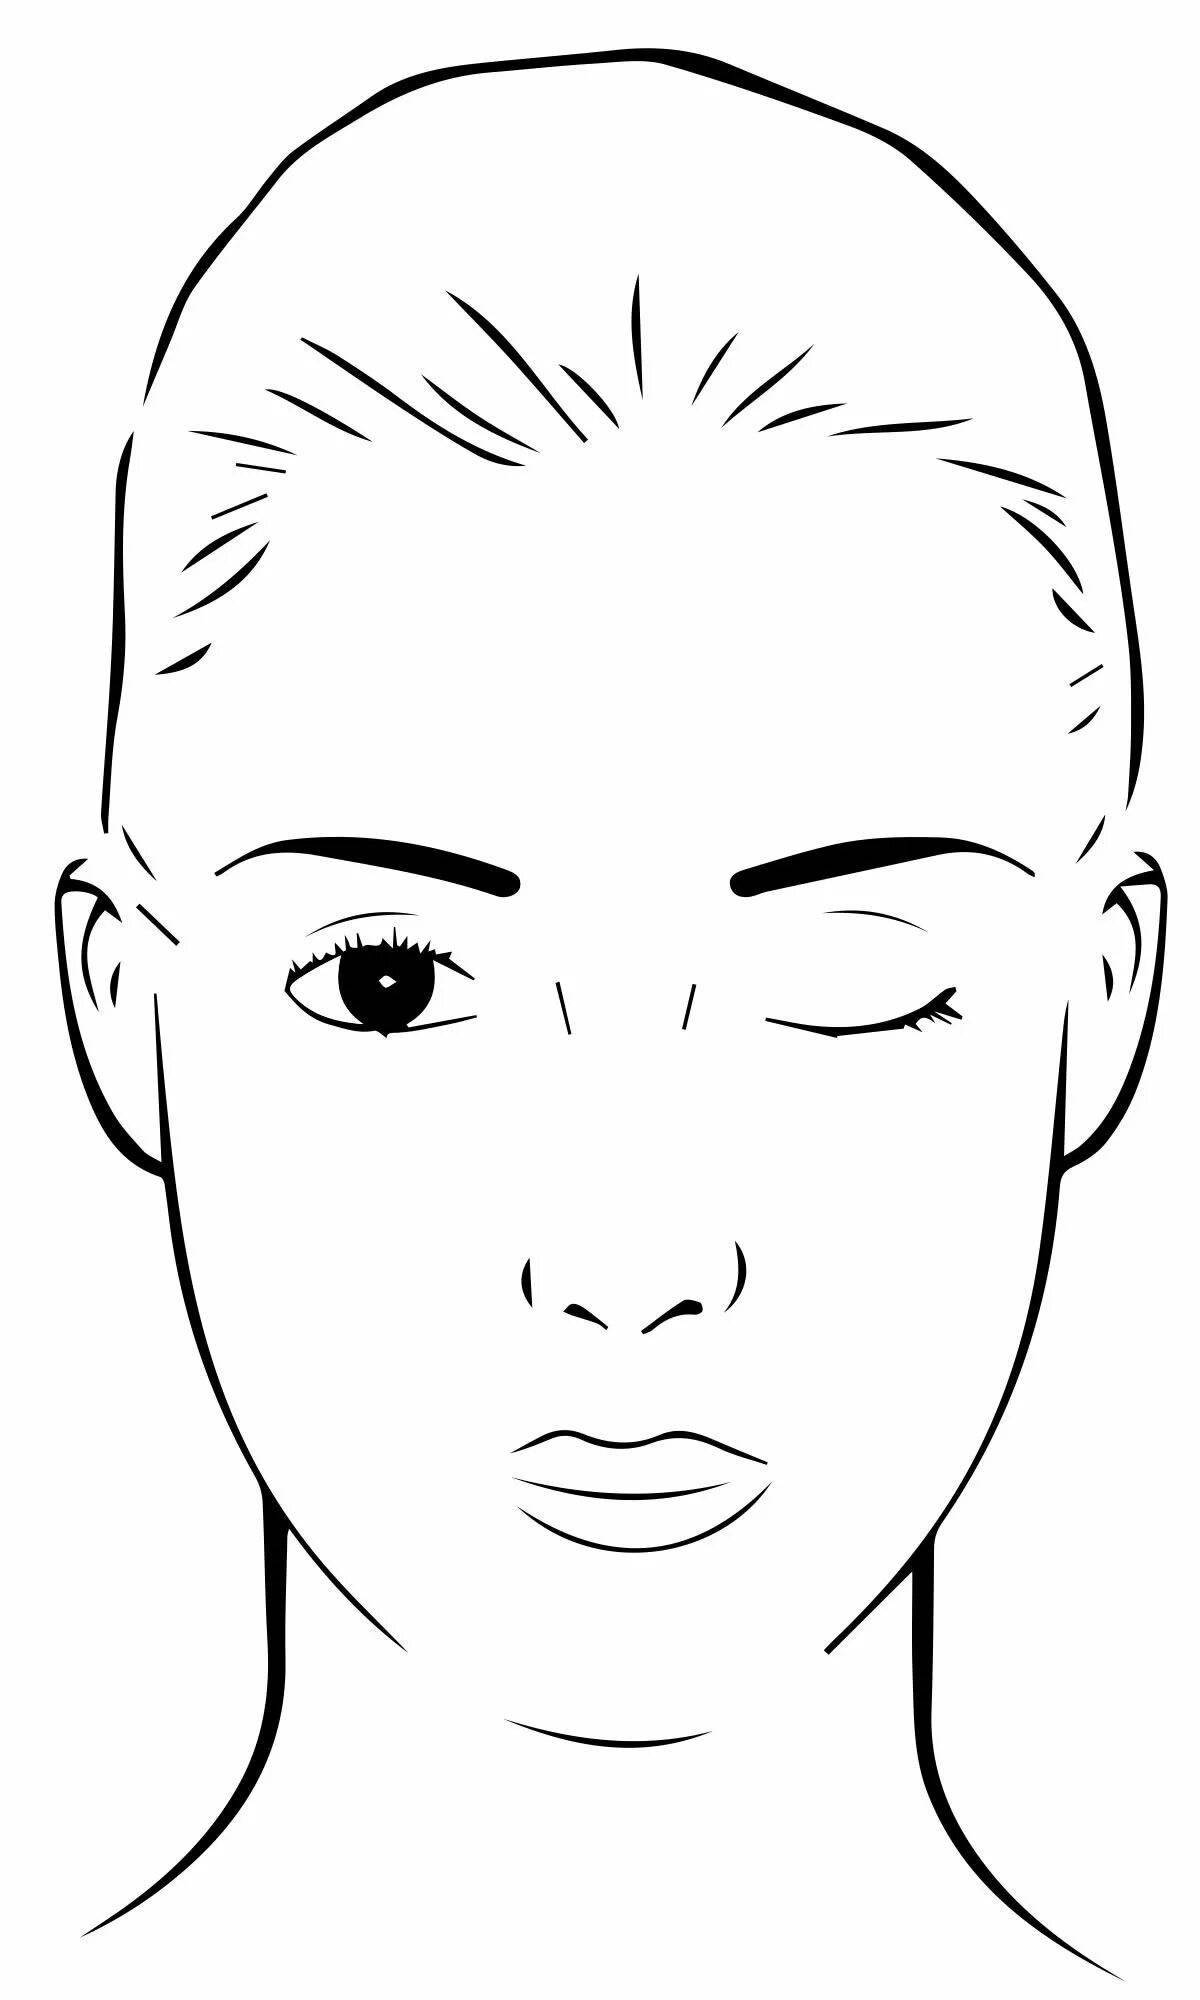 Colorful makeup face coloring page